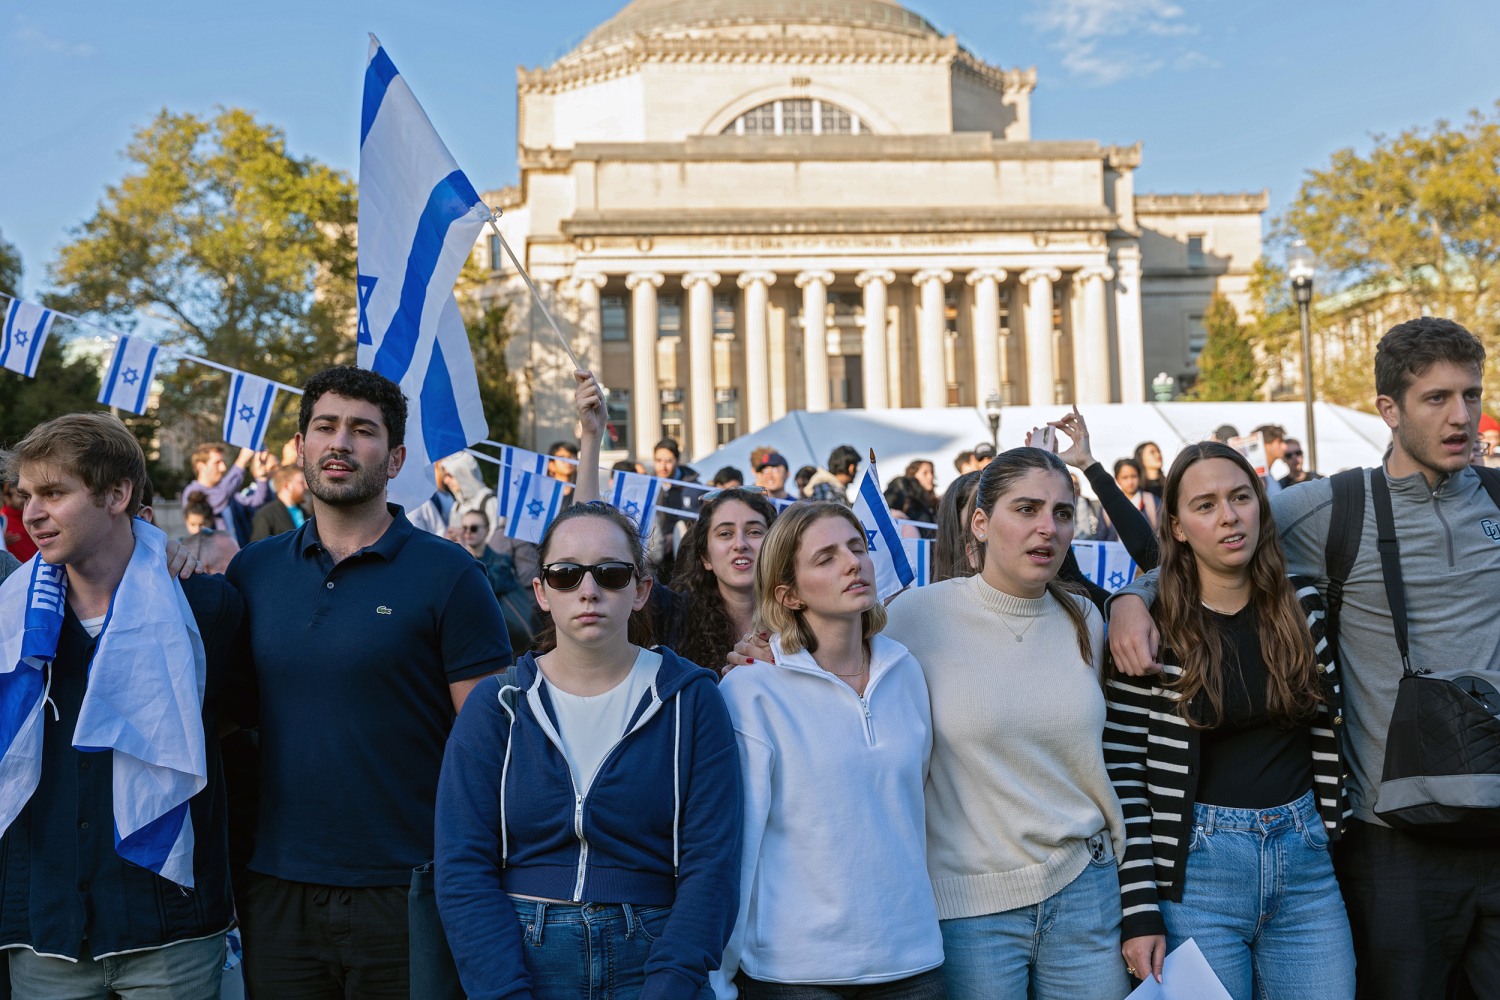 At Columbia, Student Protesters Say They Were Attacked With